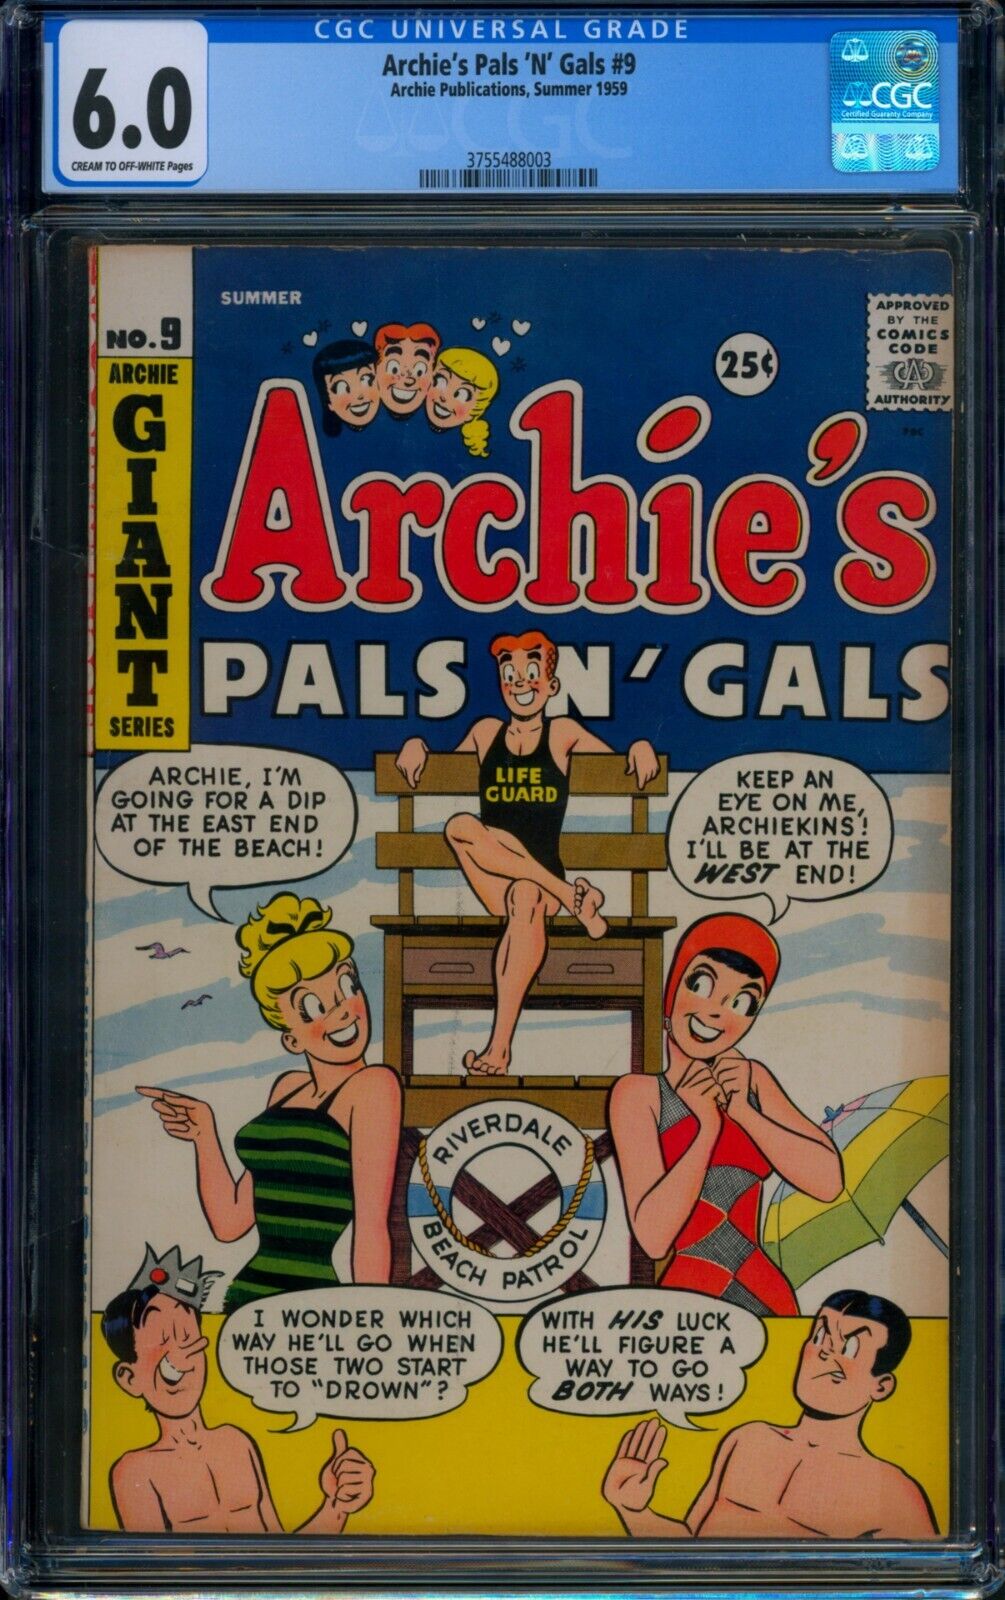 Archie\'s Pals \'n\' Gals #9 ⭐ CGC 6.0 ⭐ Betty & Veronica Swimsuit Cover GGA 1959